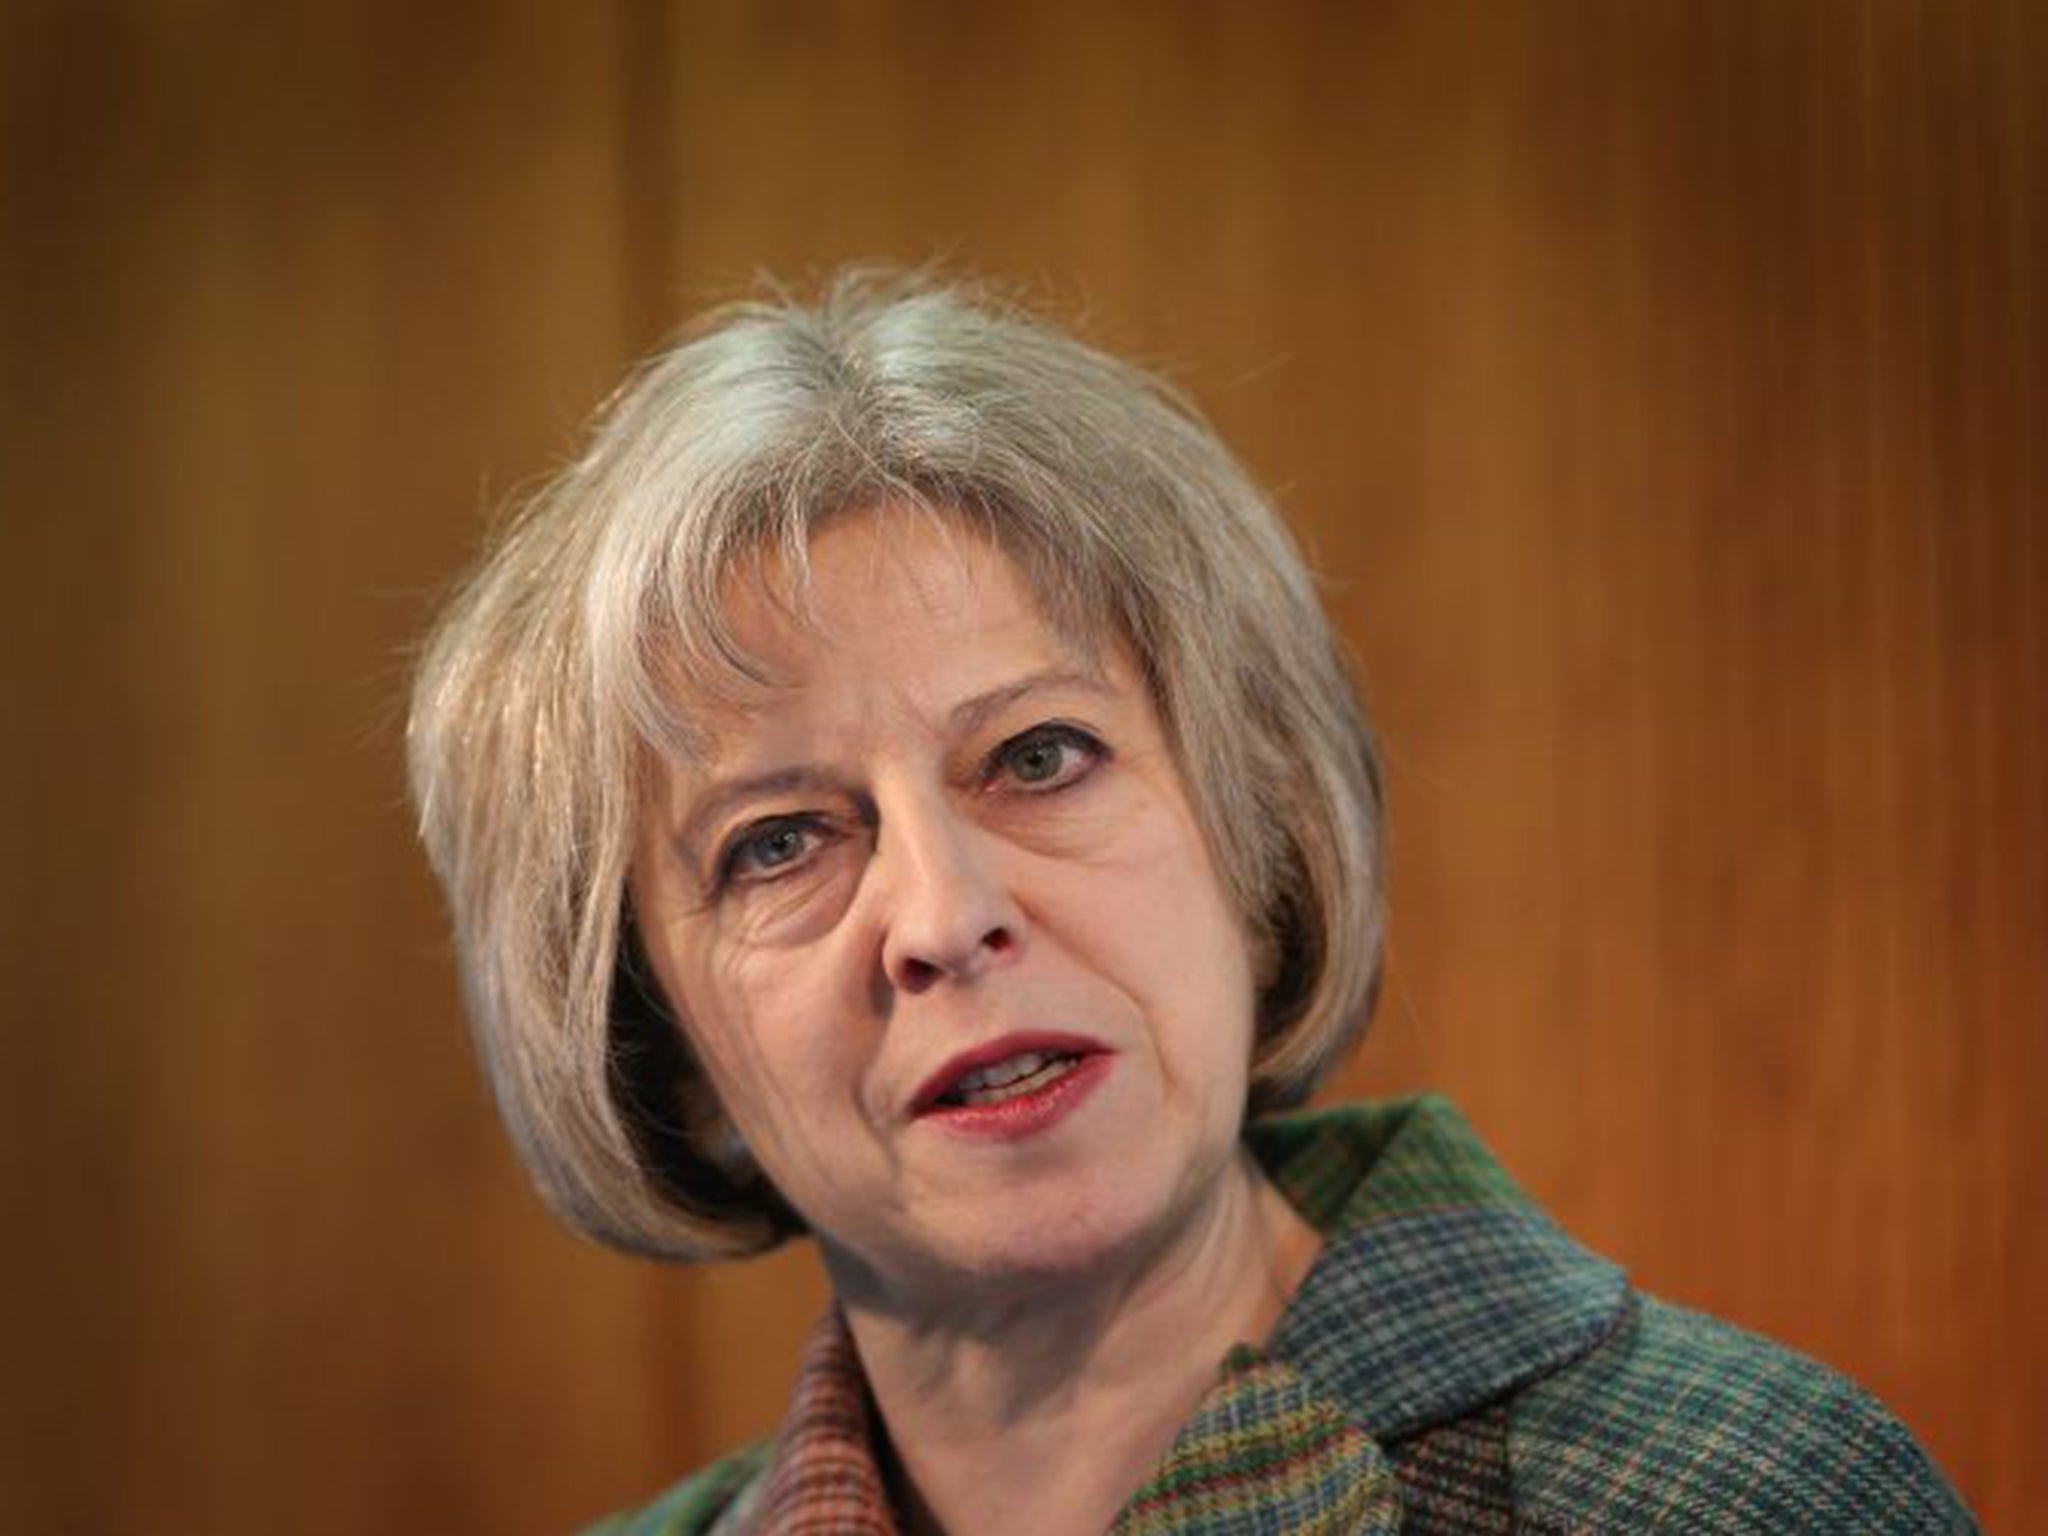 Home Secretary Theresa May will introduce the new Bill this week